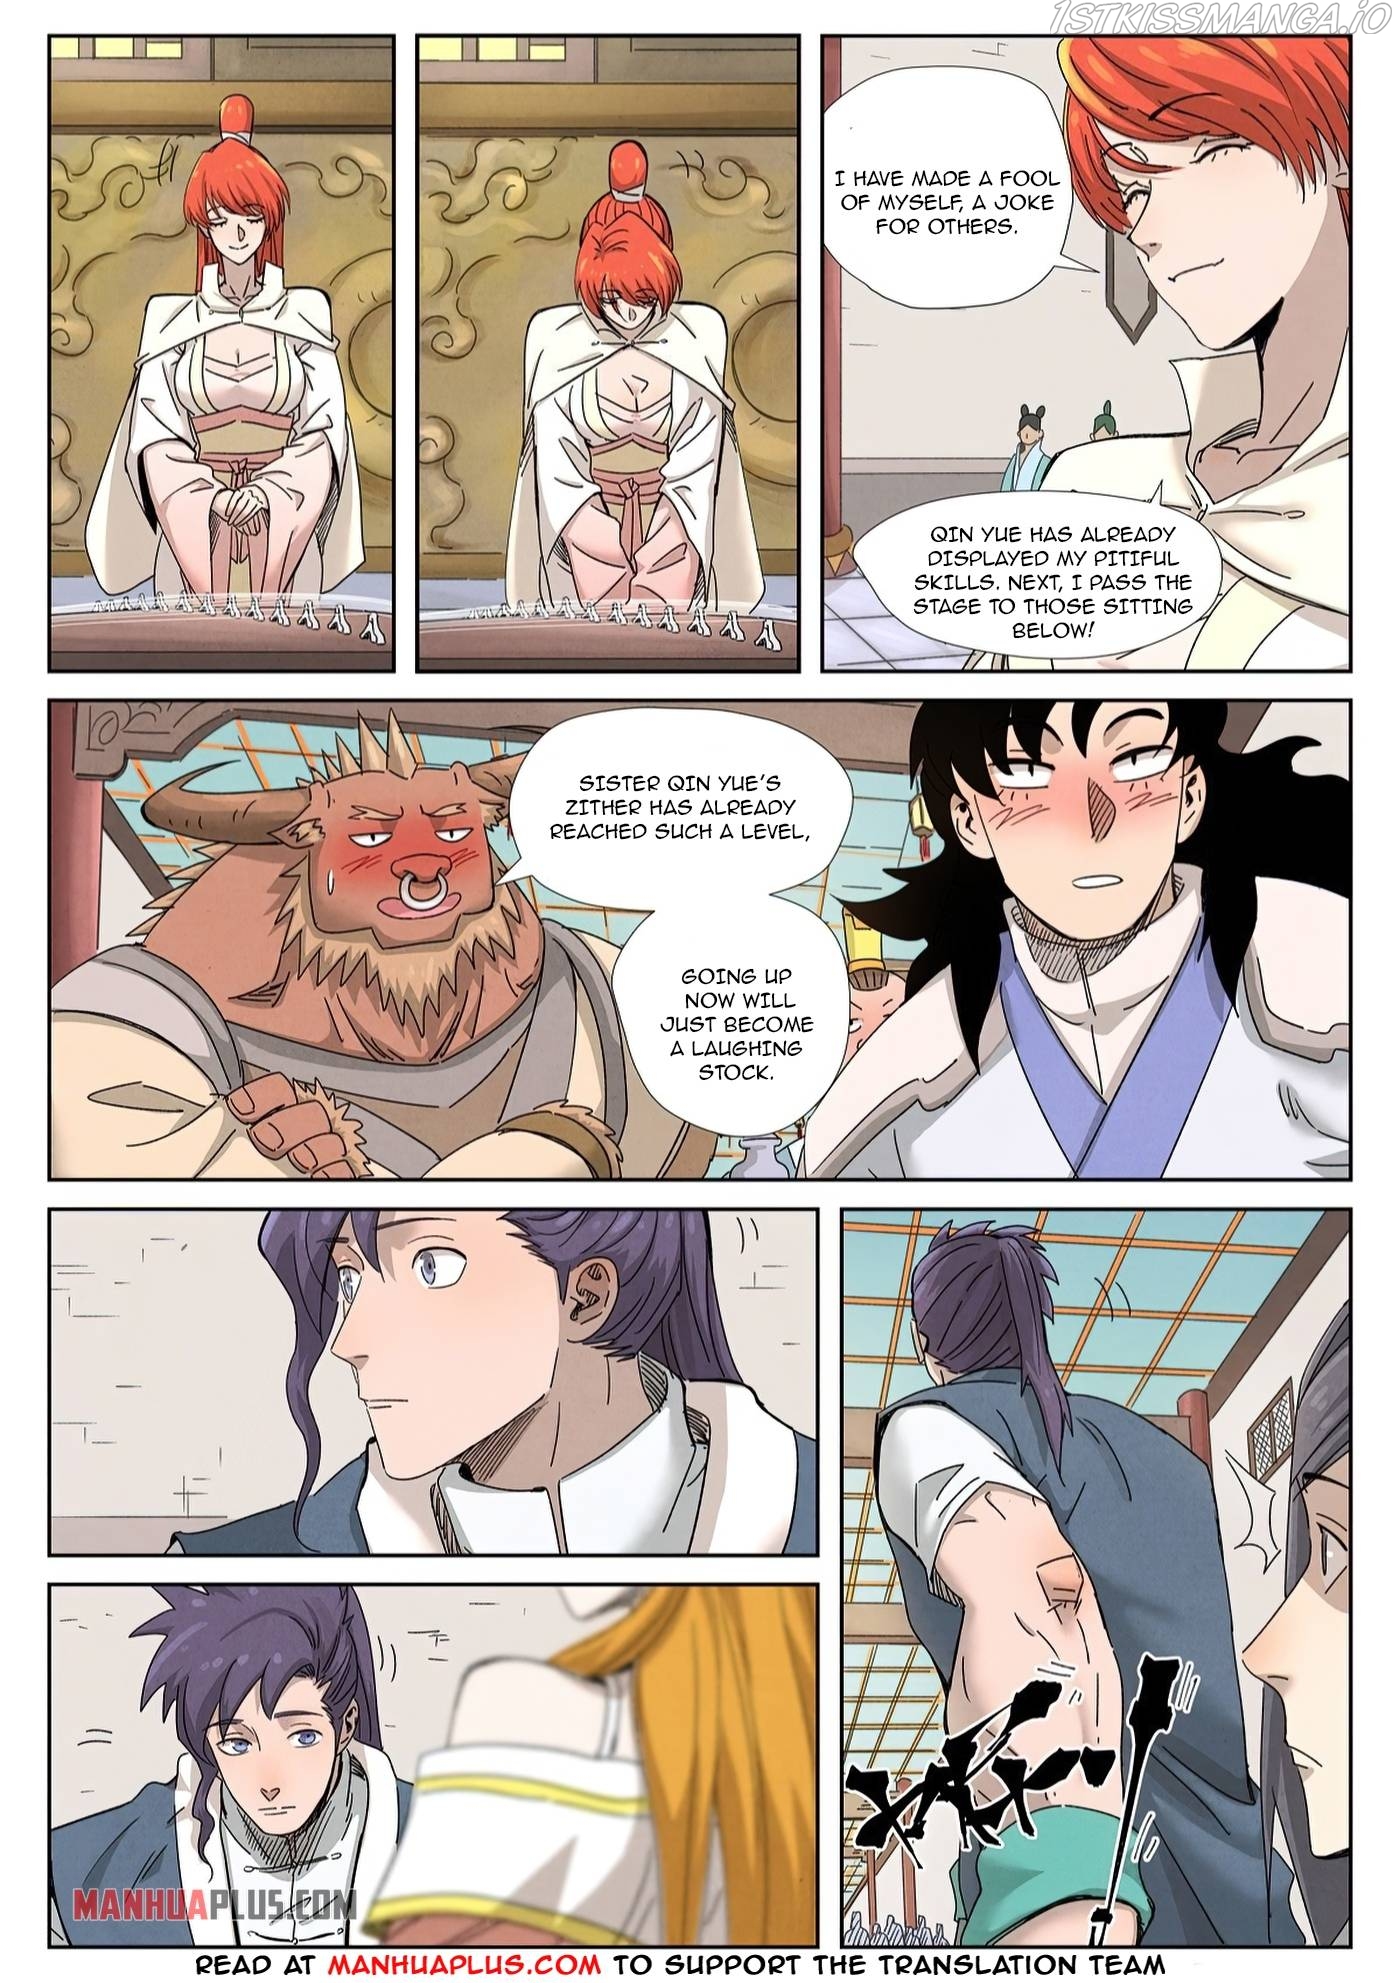 Tales of Demons and Gods Manhua Chapter 339.6 - Page 2